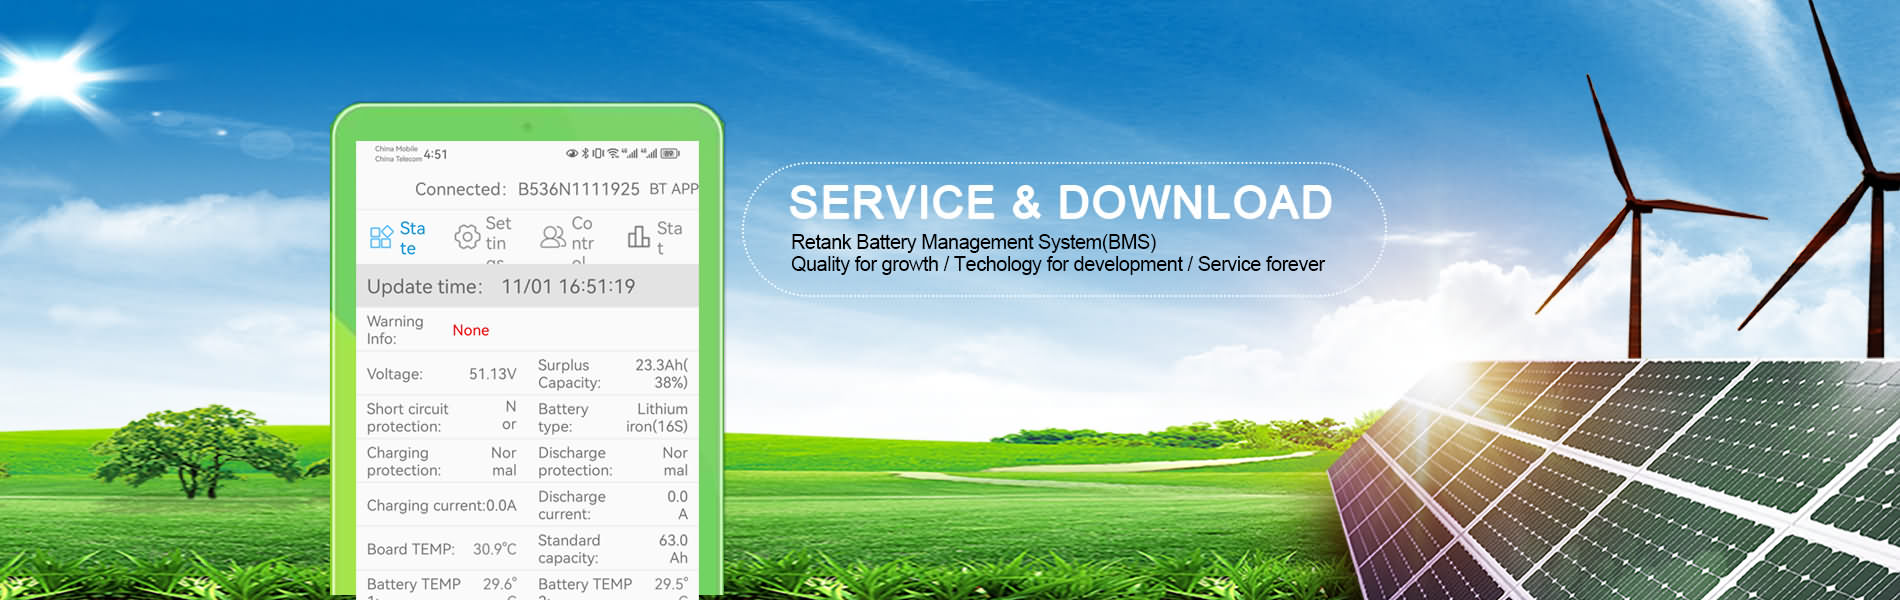 Services & Download